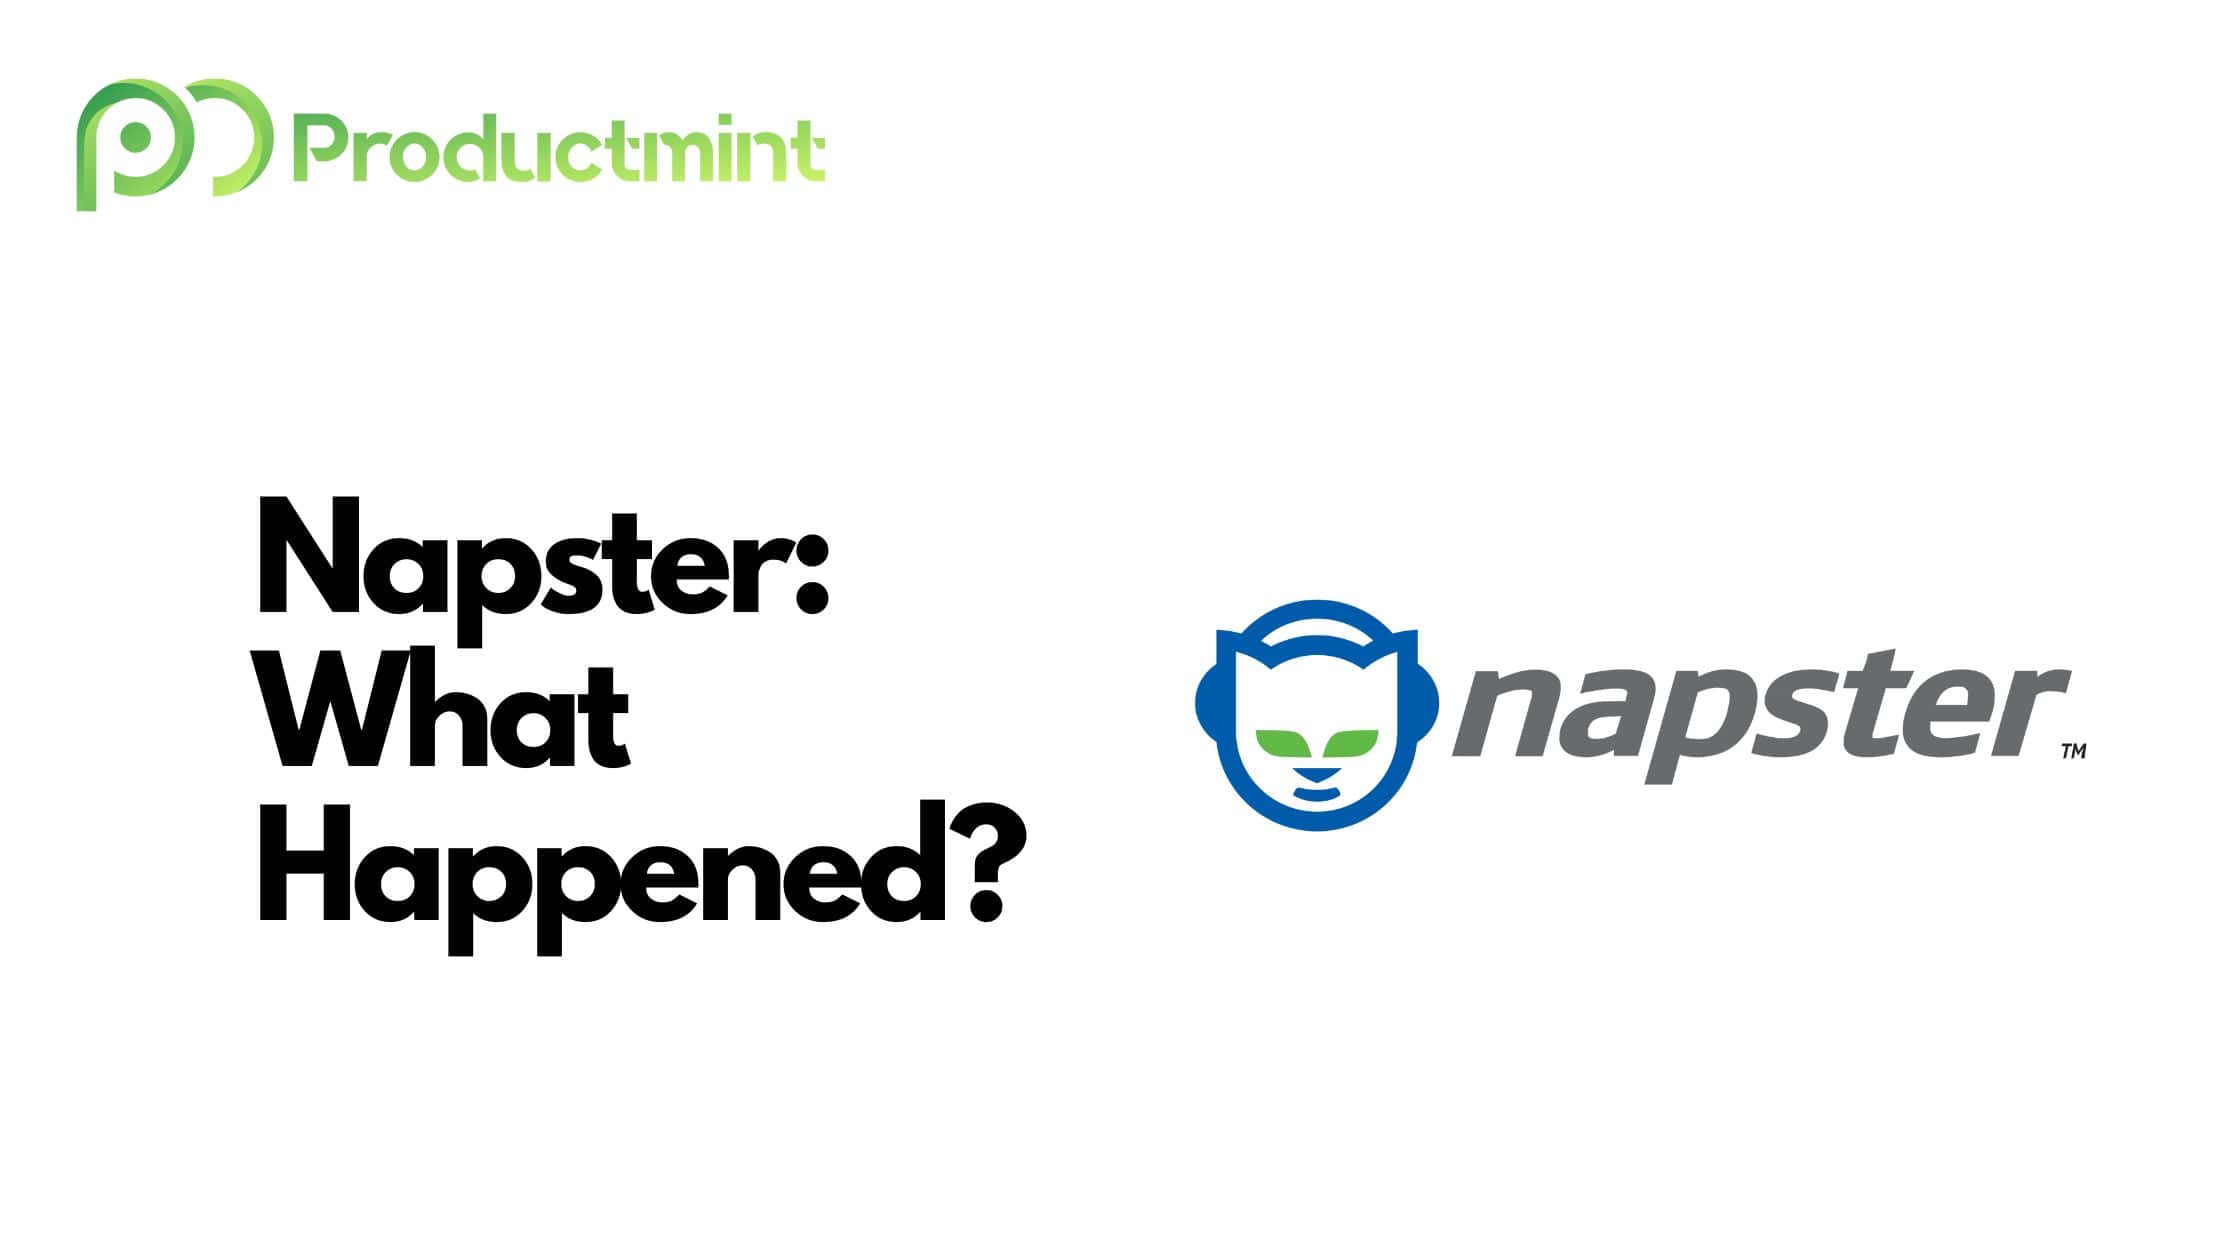 Napster What Happened